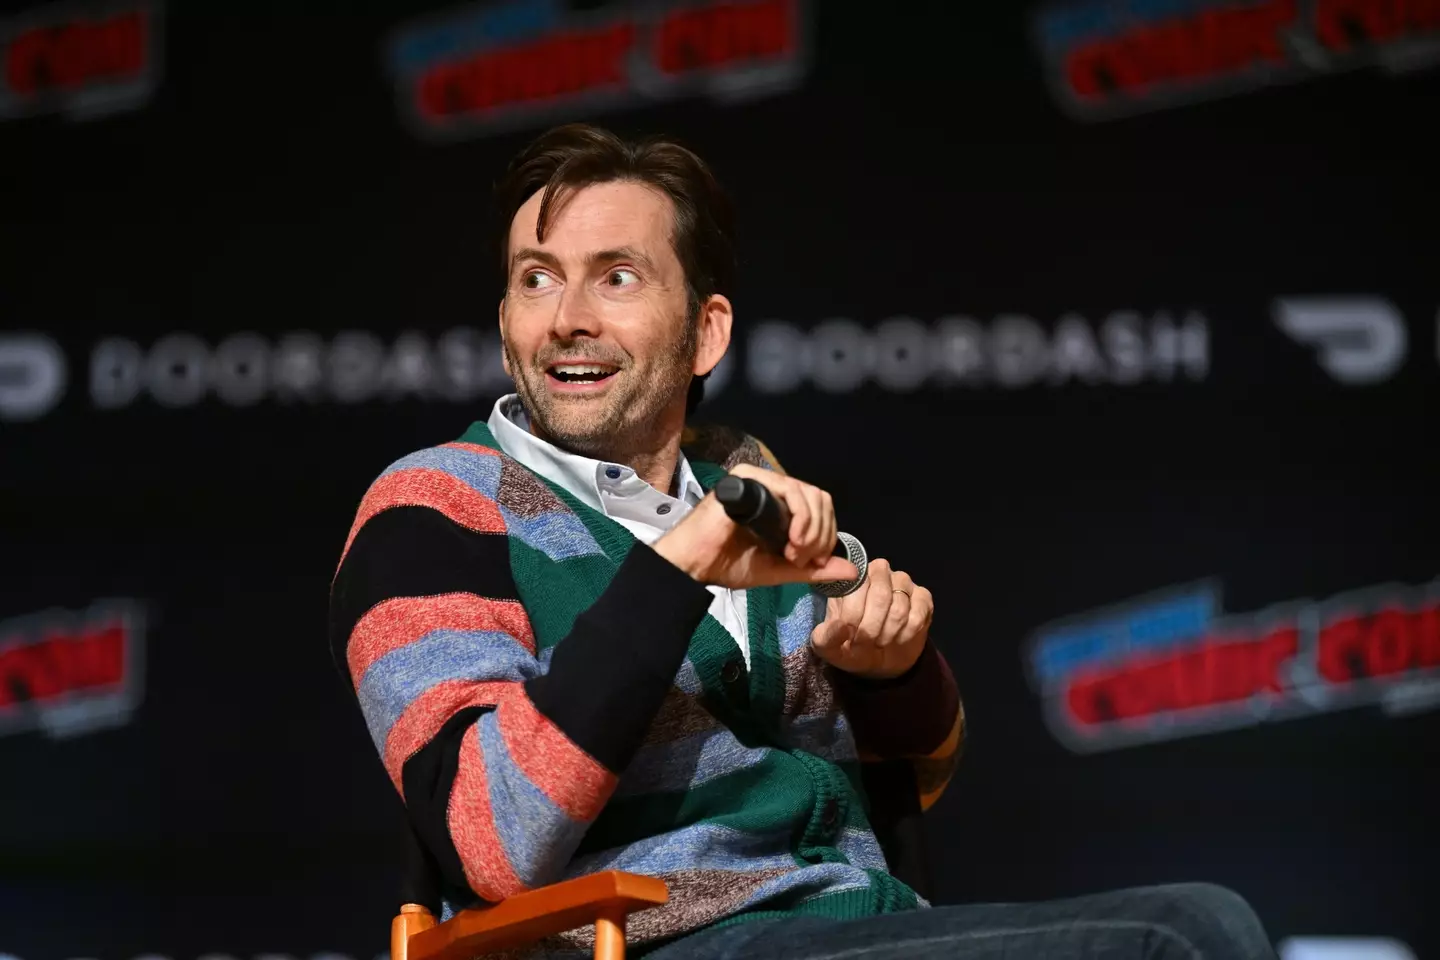 The actor also discussed his journey to becoming a Tennant at New York Comic Con.